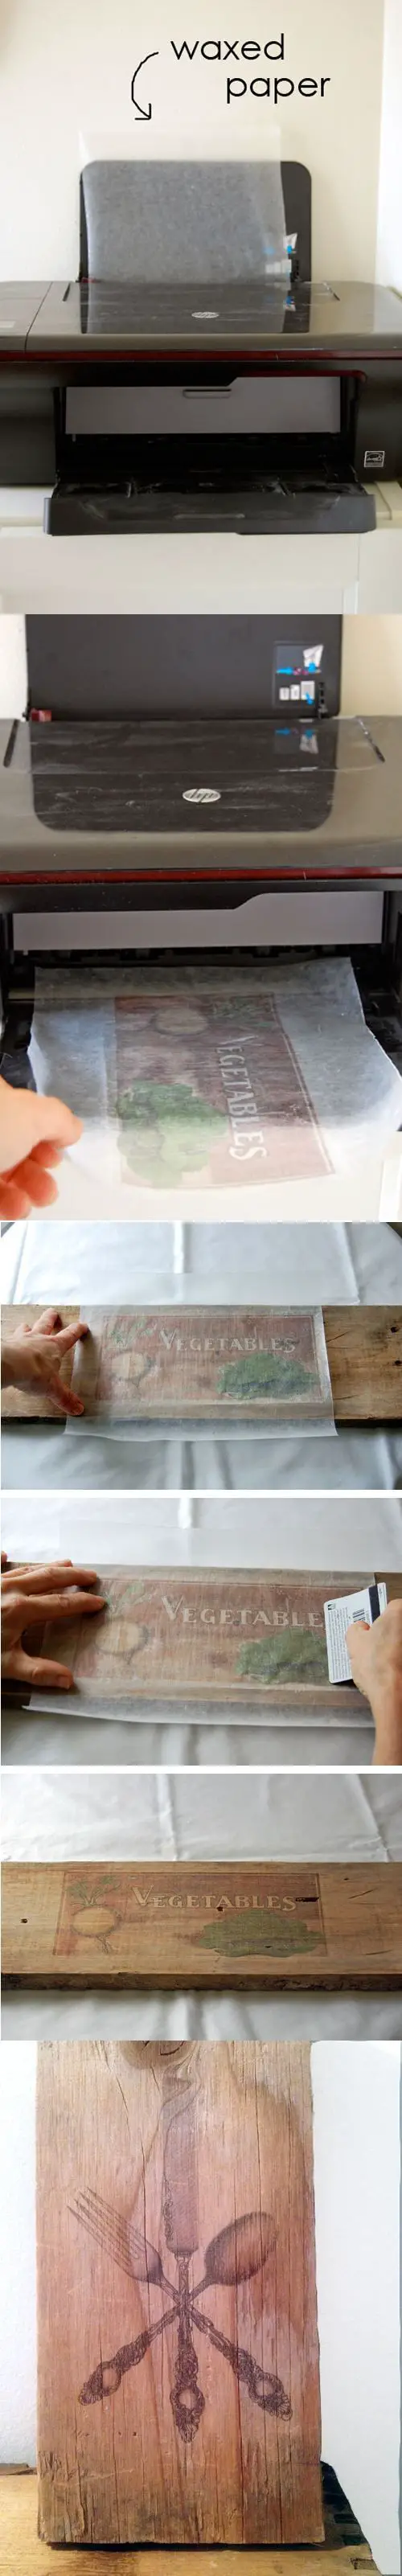 DIY Pallet proejcts That Are Easy to Make and Sell ! How to Print Pictures on Wood Waxed Paper Transfer, Wax Paper Transfer Tutorial Ideas